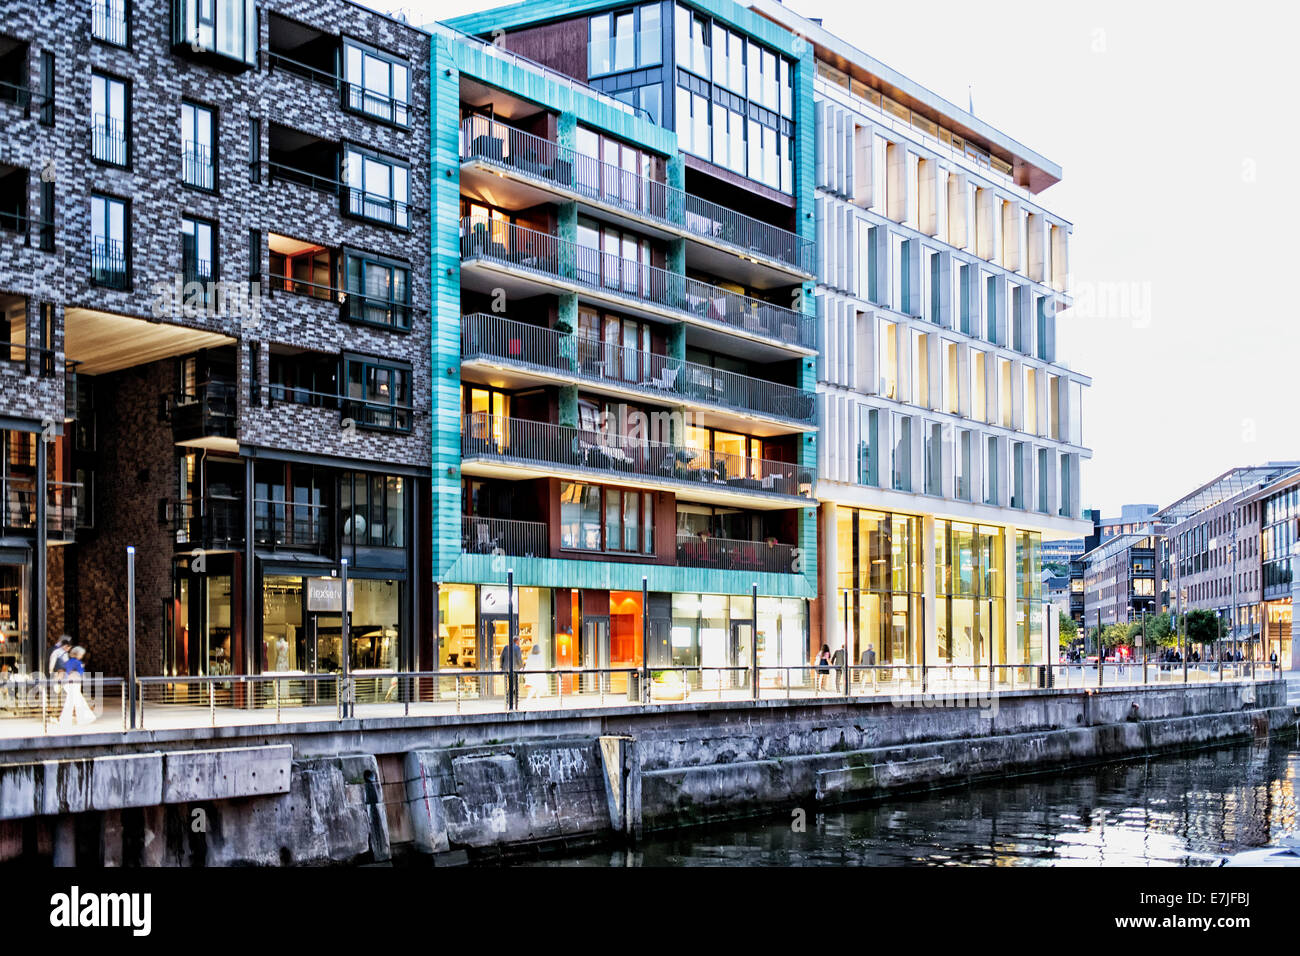 Aker Brygge, architecture, camping site, Frogner, harbour, port, capital, luxury, nightlife, Norway, Europe, Oslo, Scandinavia Stock Photo